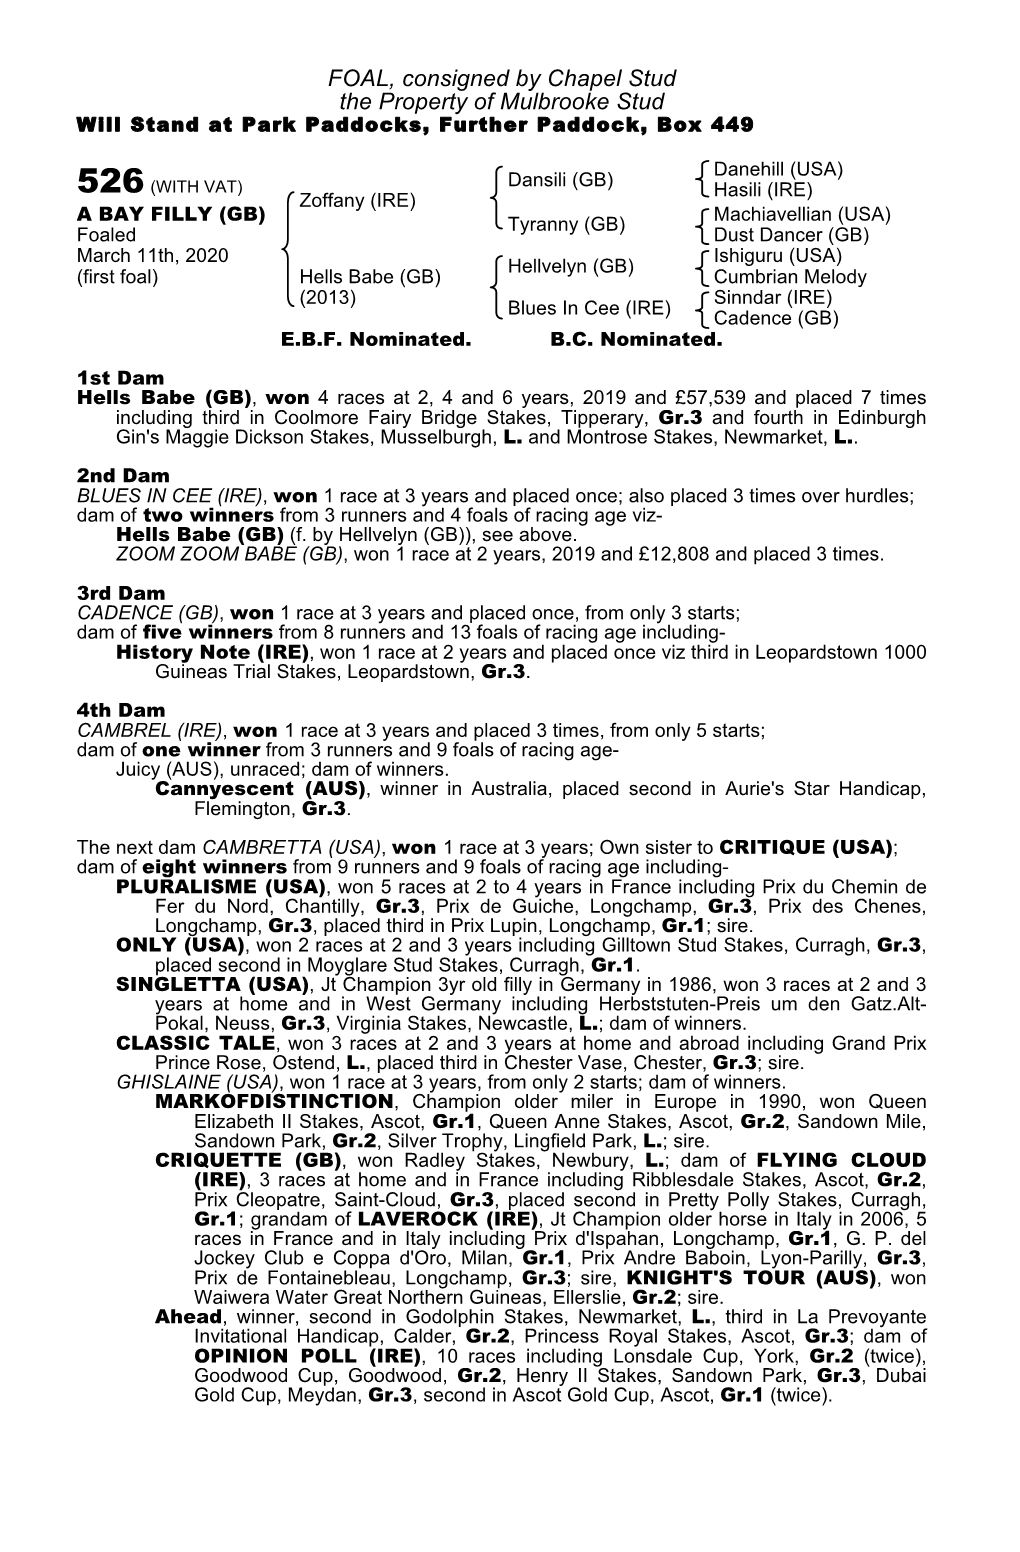 FOAL, Consigned by Chapel Stud the Property of Mulbrooke Stud Will Stand at Park Paddocks, Further Paddock, Box 449